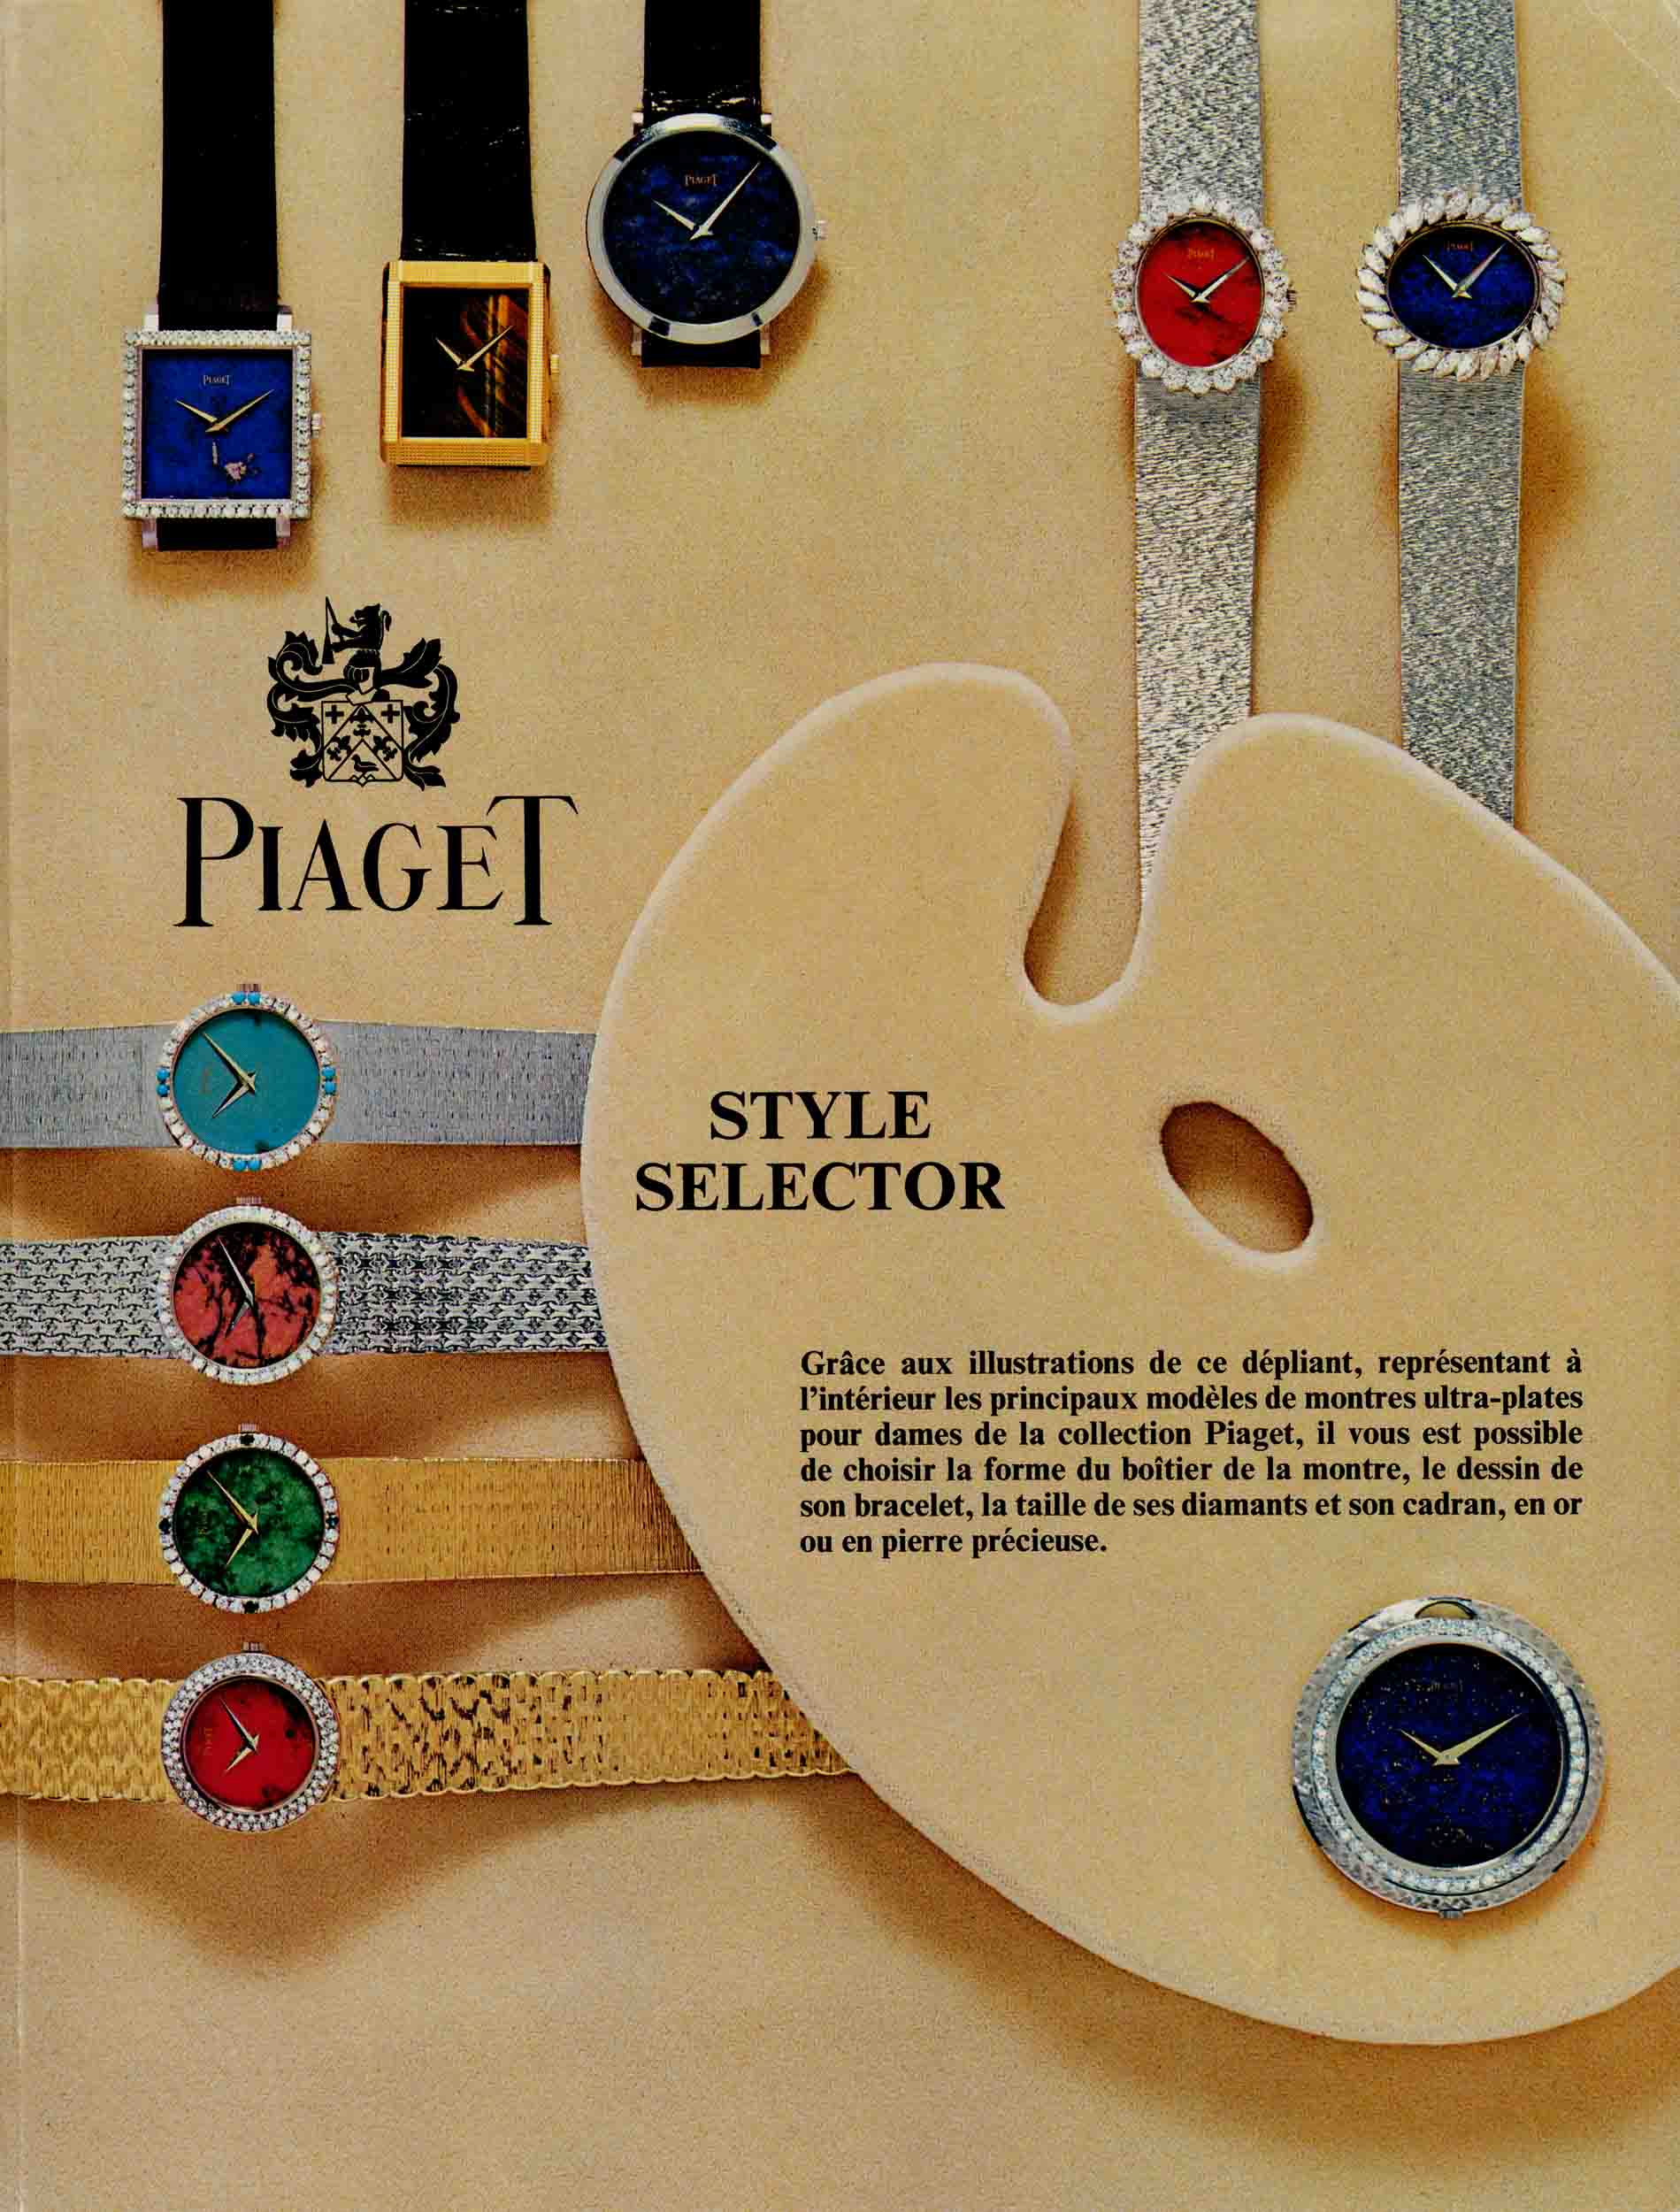 Travel back in time with Piaget 33